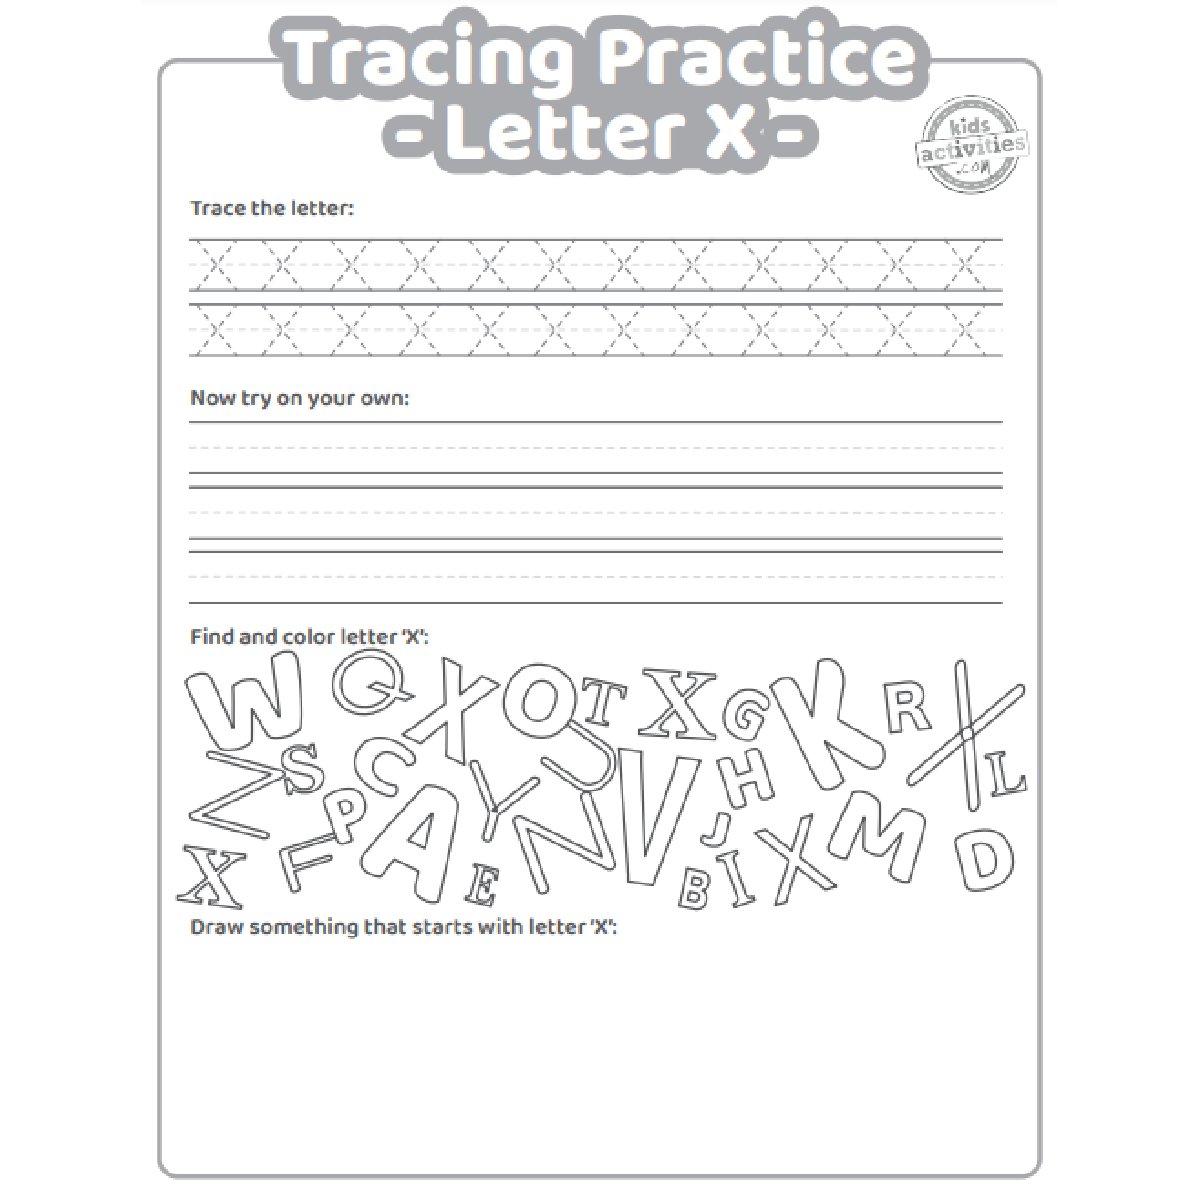 Free letter x practice worksheet trace it write it find it draw kids activities blog